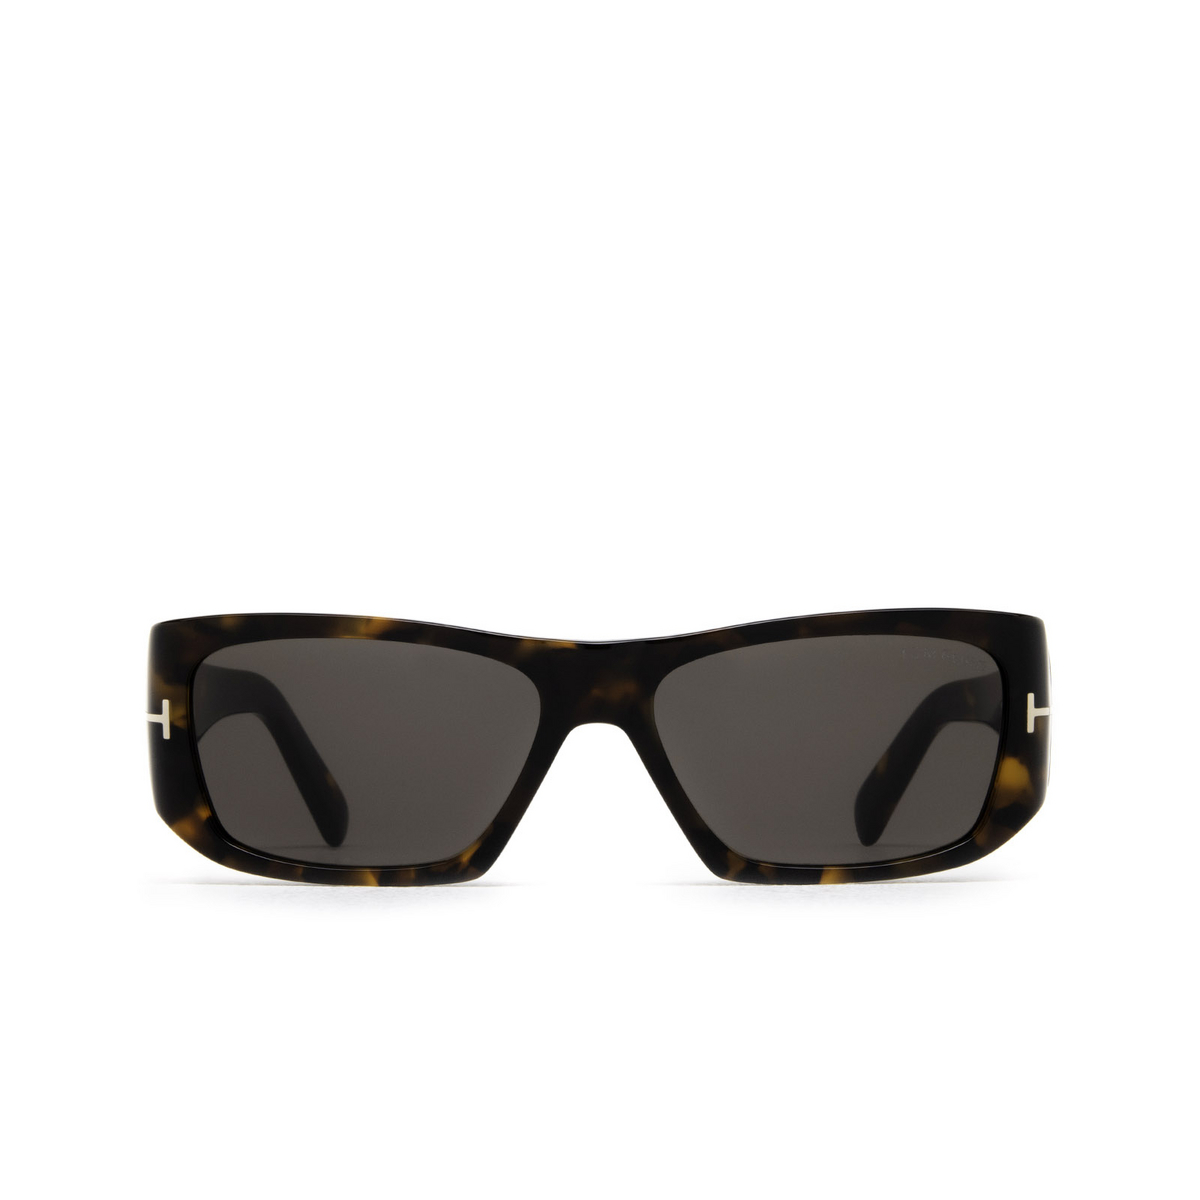 Tom Ford ANDRES-02 Sunglasses 52A Dark Havana - front view